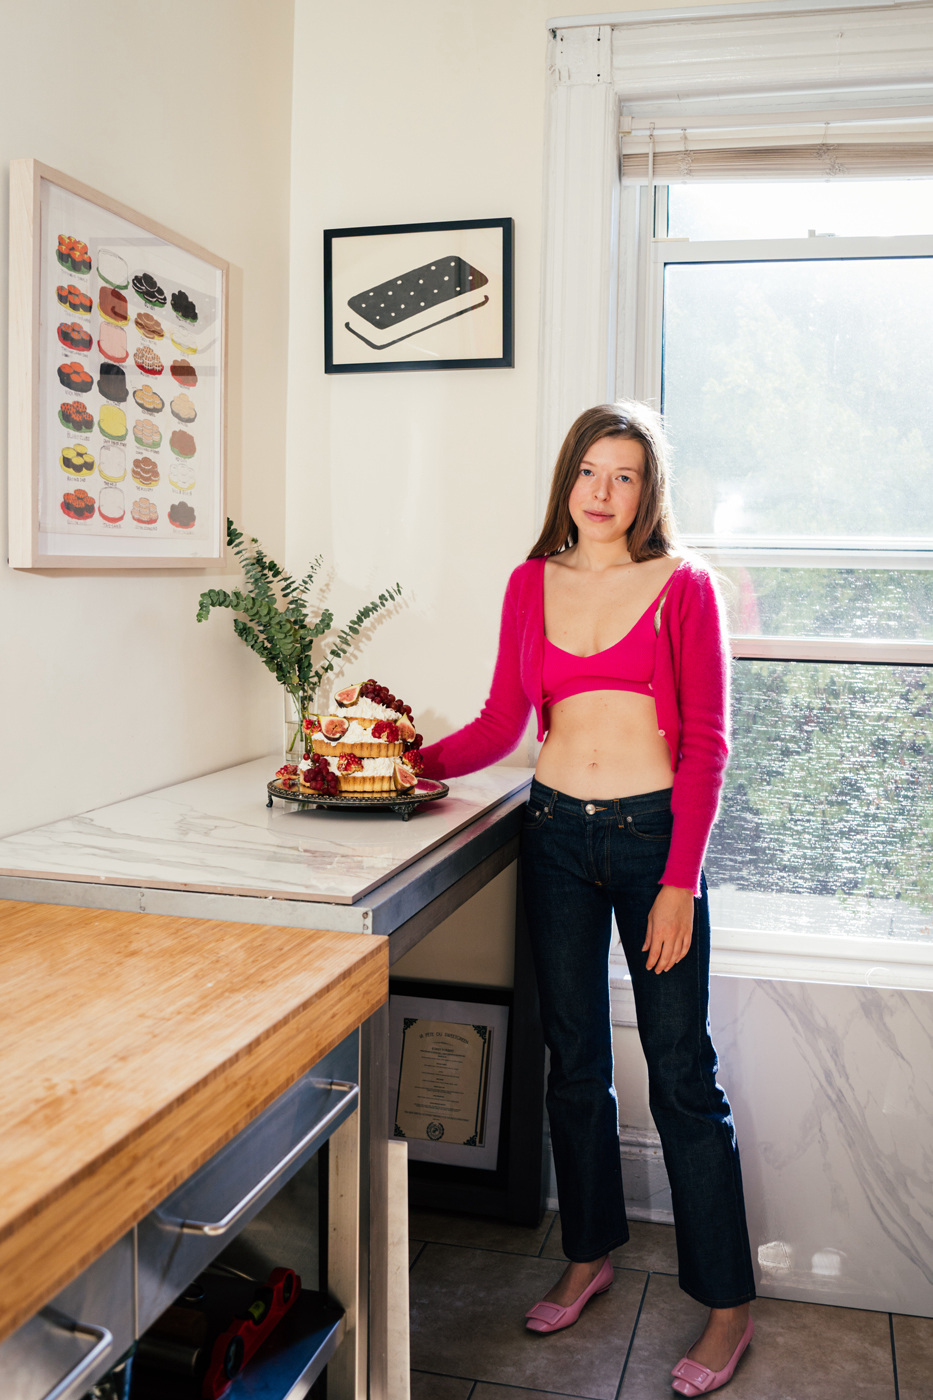 Paris Starn in her Brooklyn home, where she conceives, creates, and captures her confectioneries.